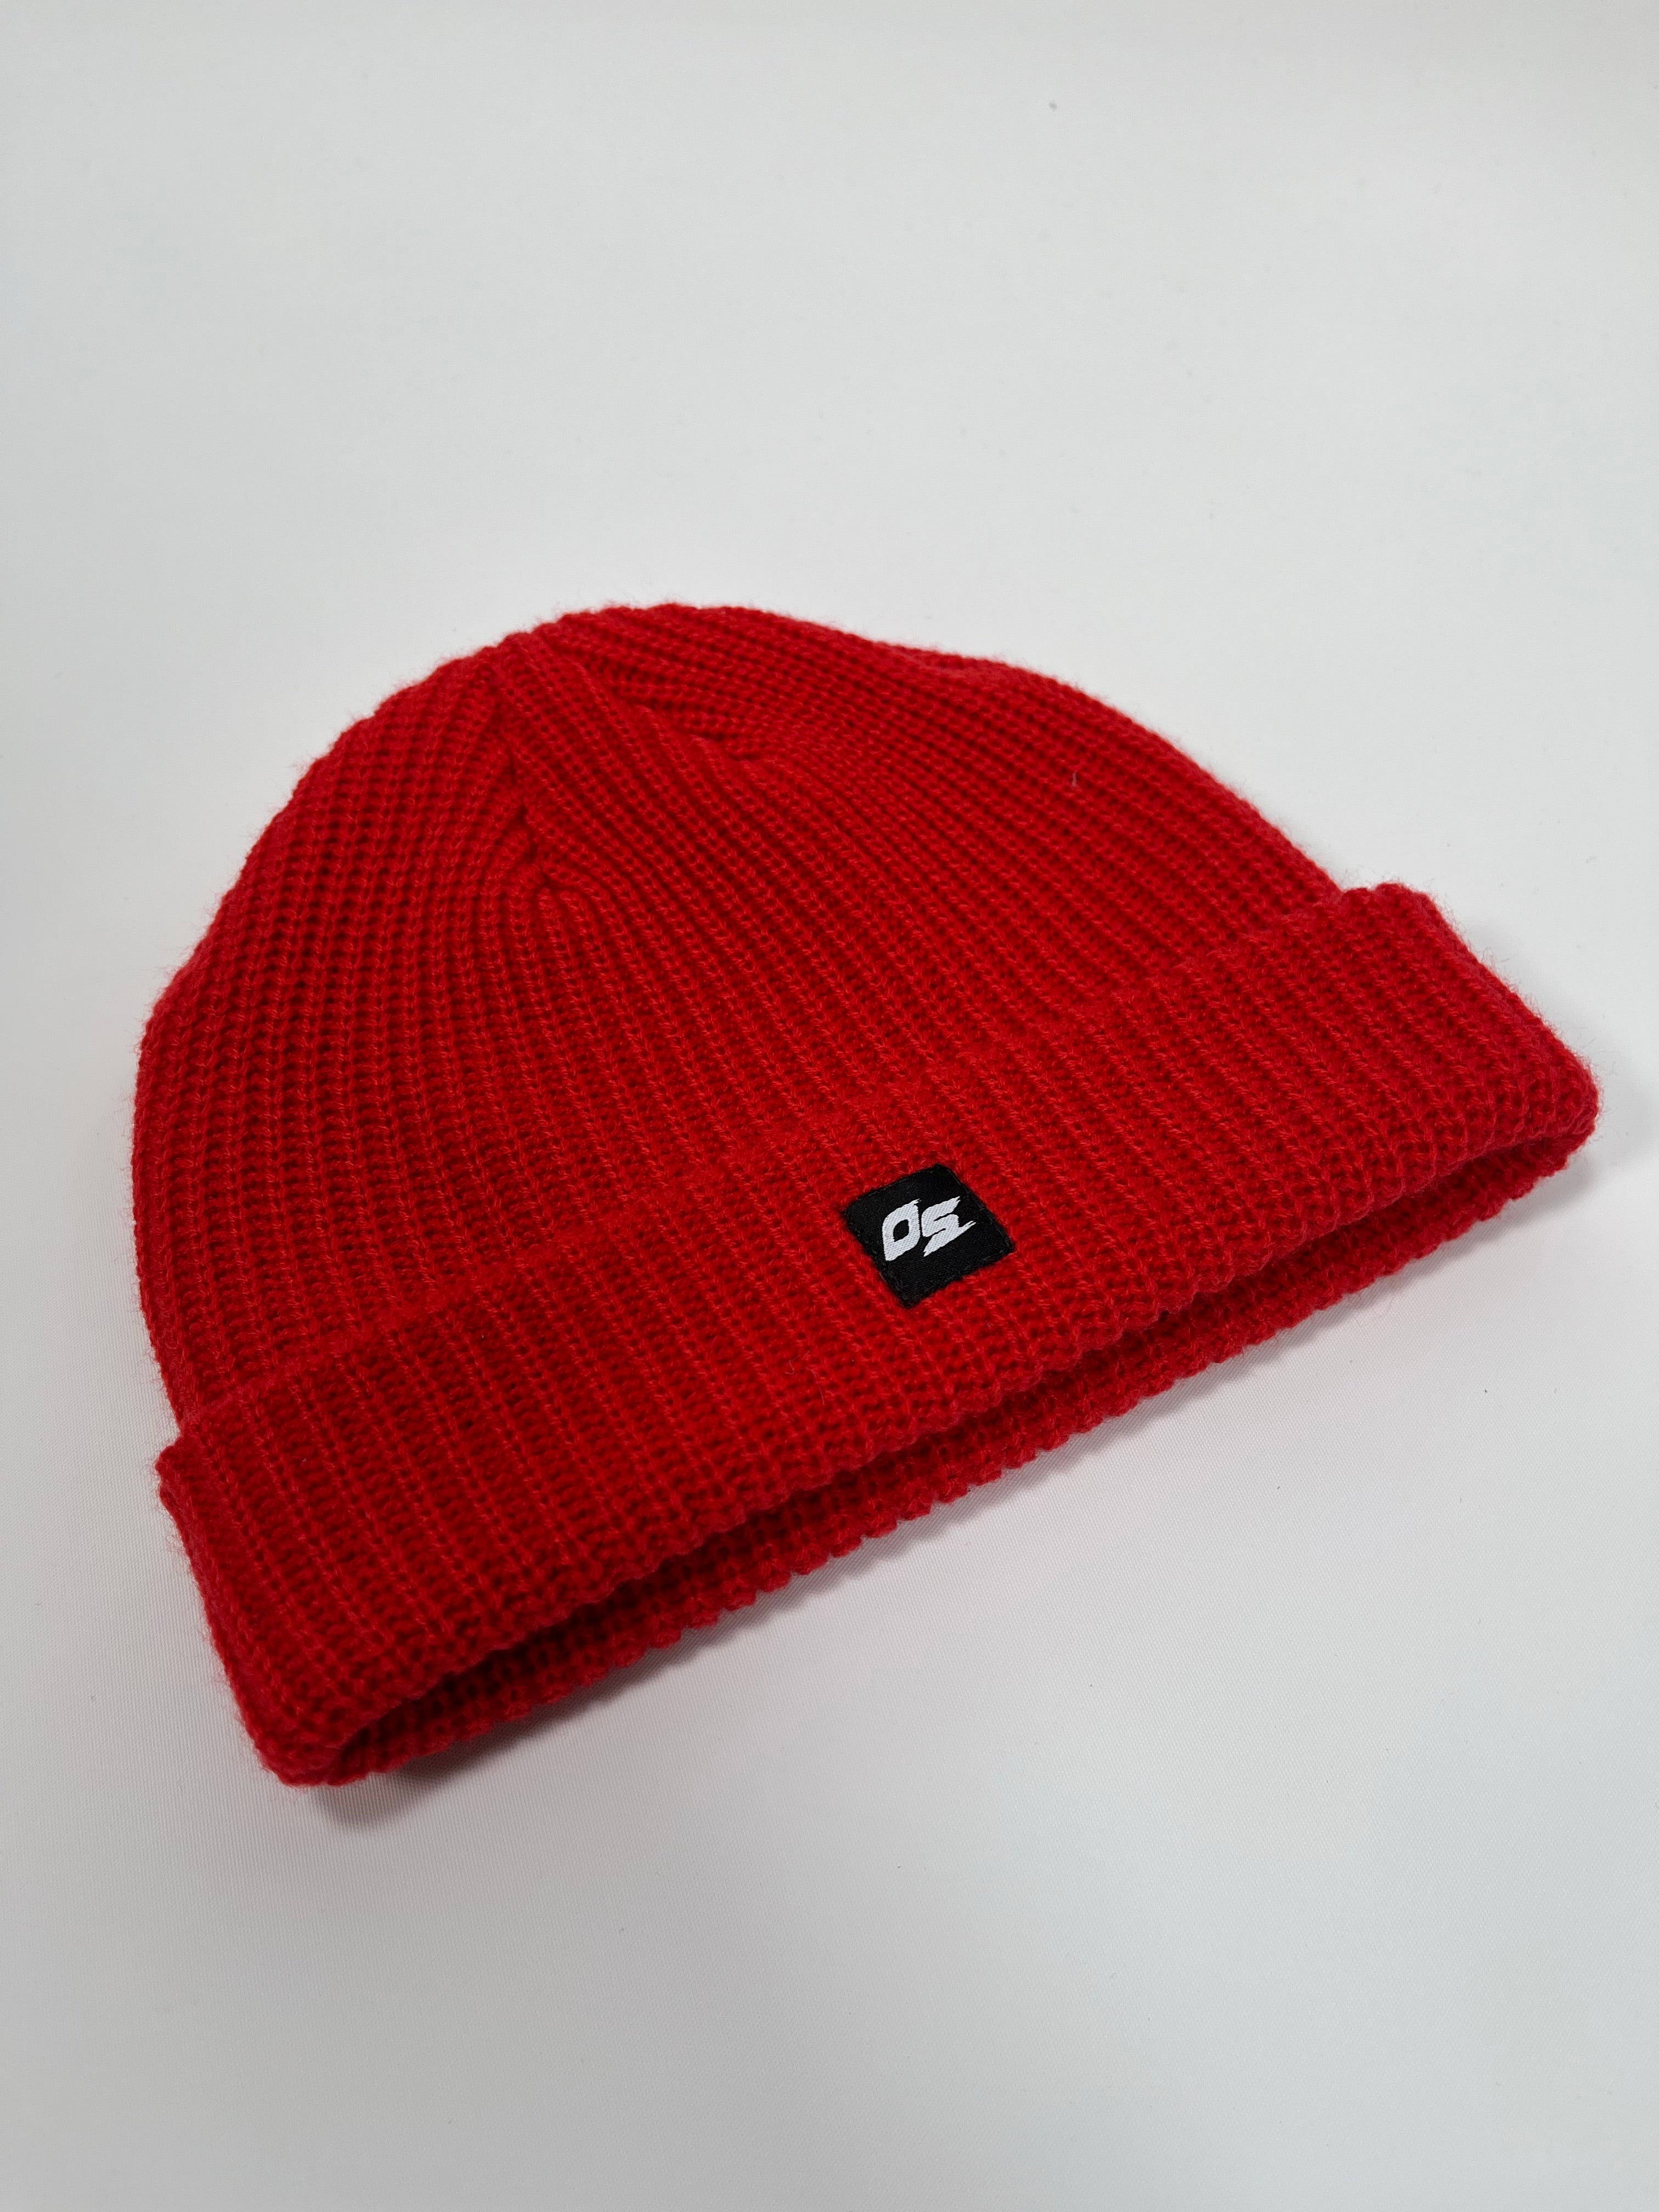 OS® CABLE BEANIE- red – SPORTS OTSDR